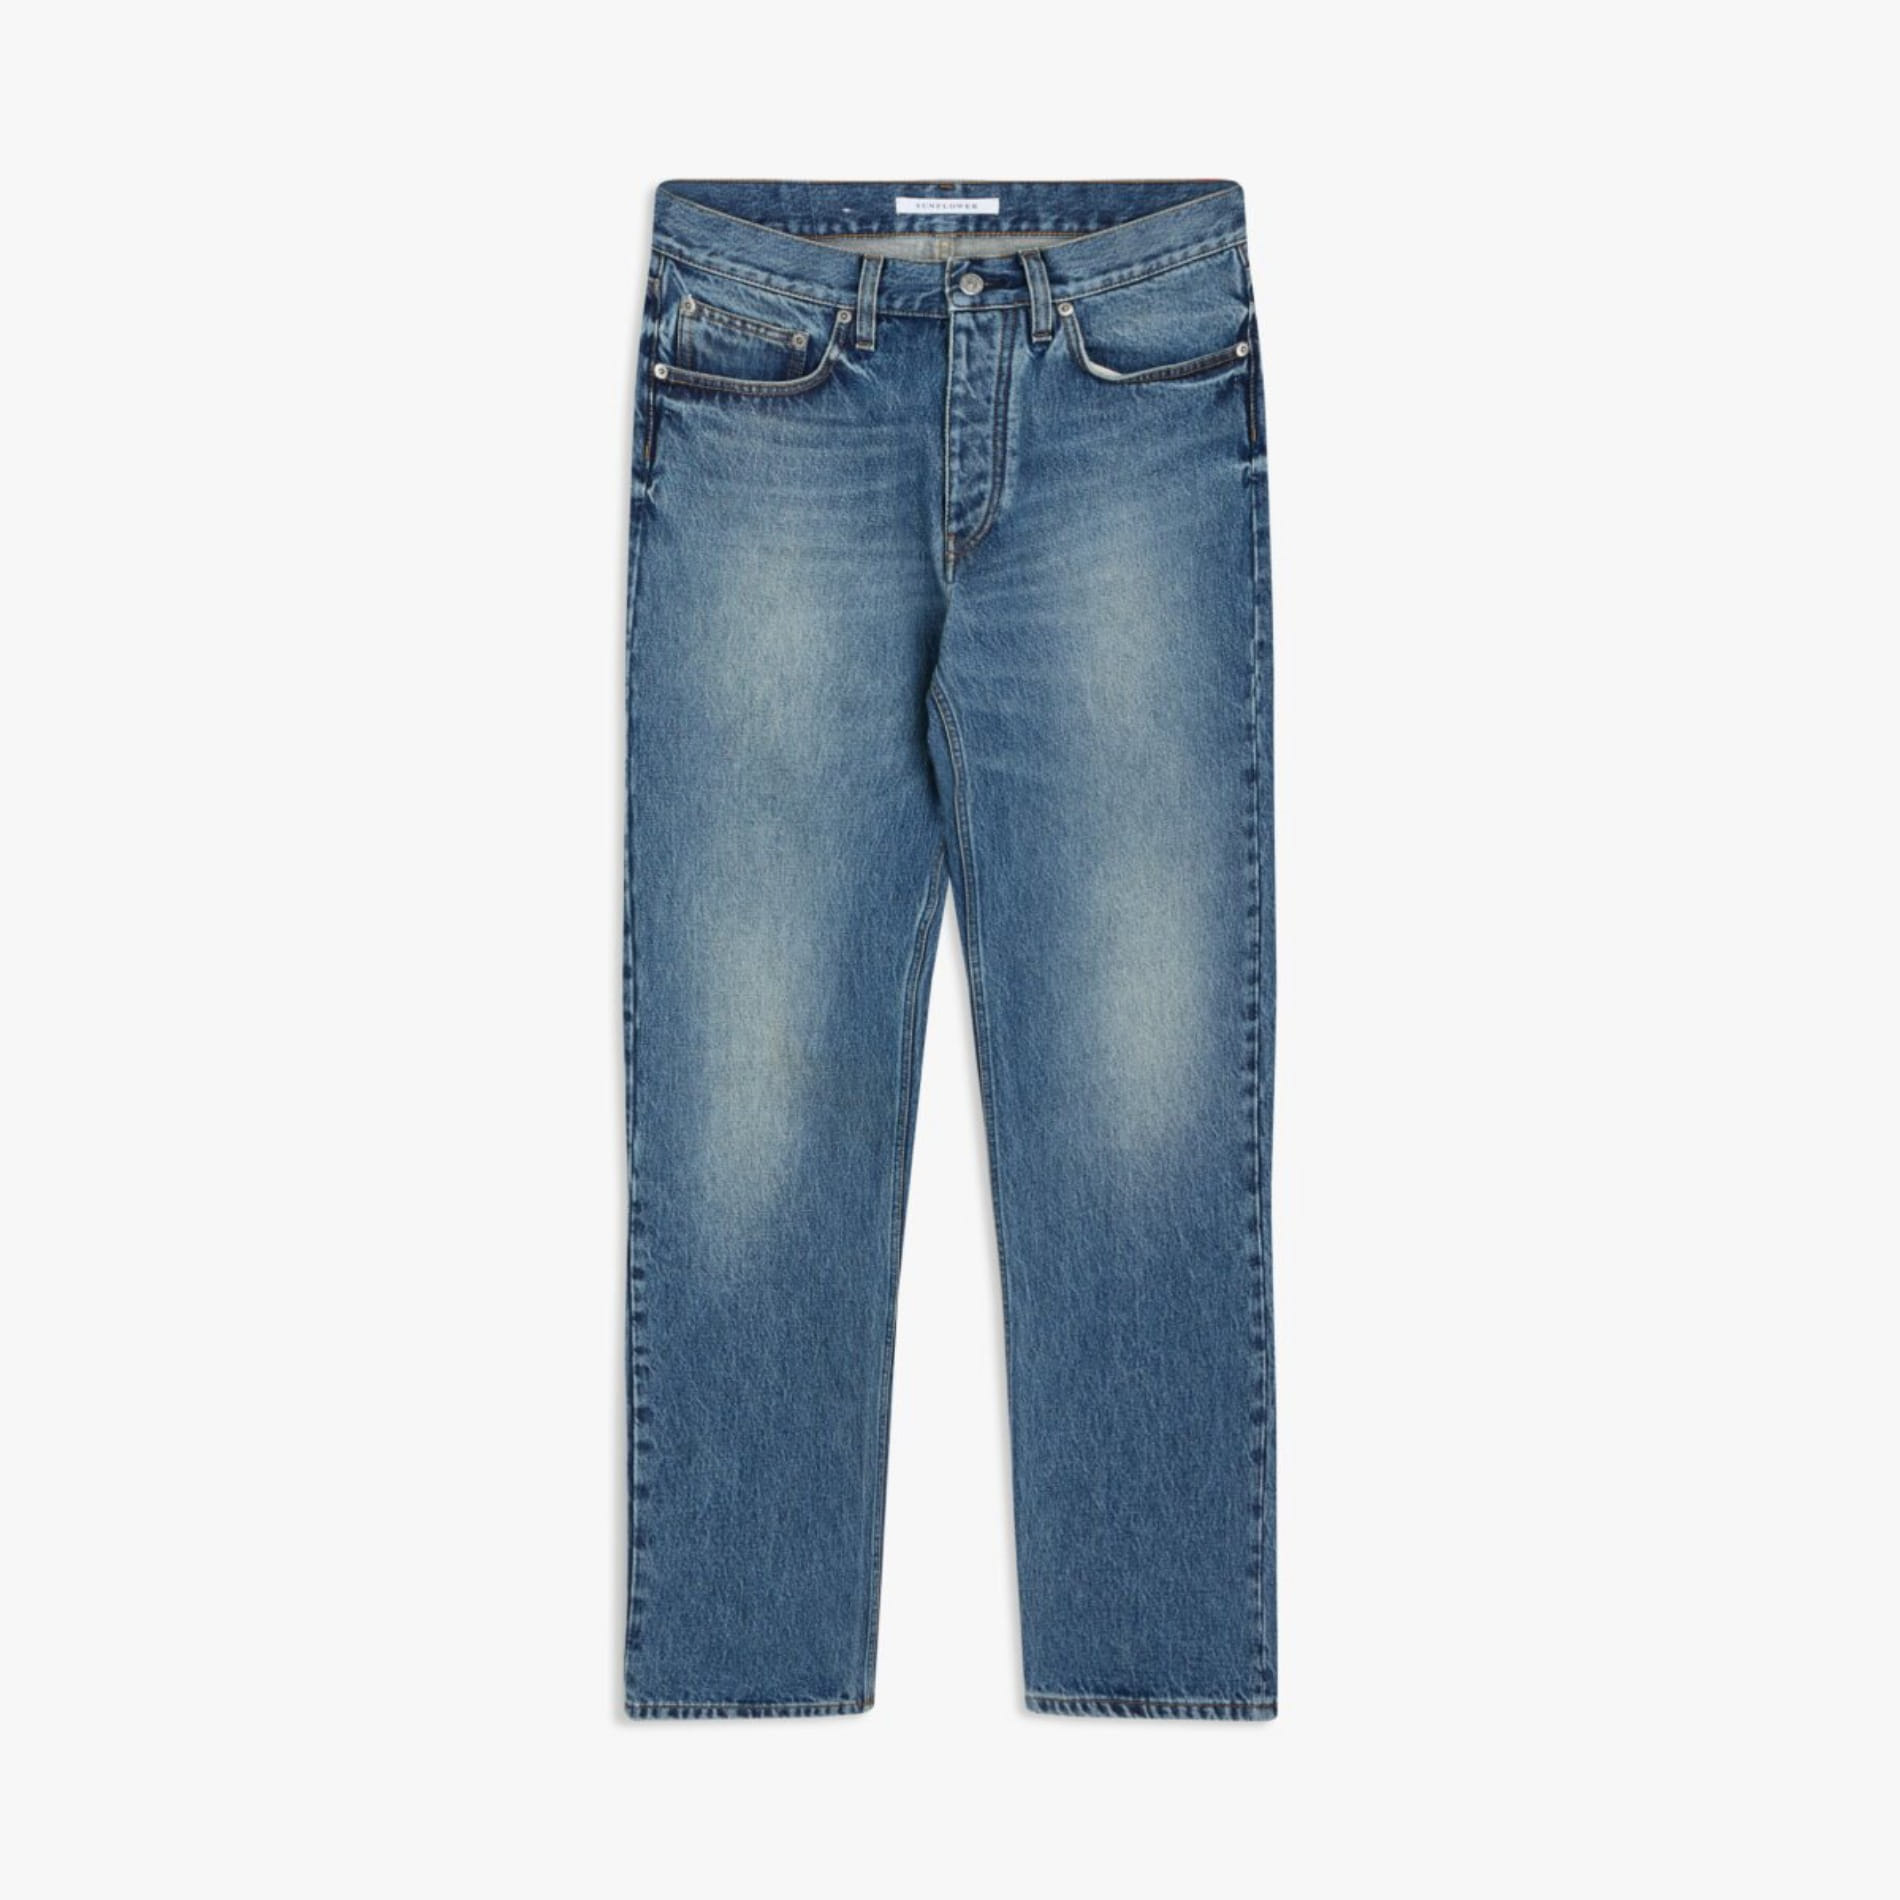 AW22 SUNFLOWER 5038 STANDARD JEANS WASHED BLUE